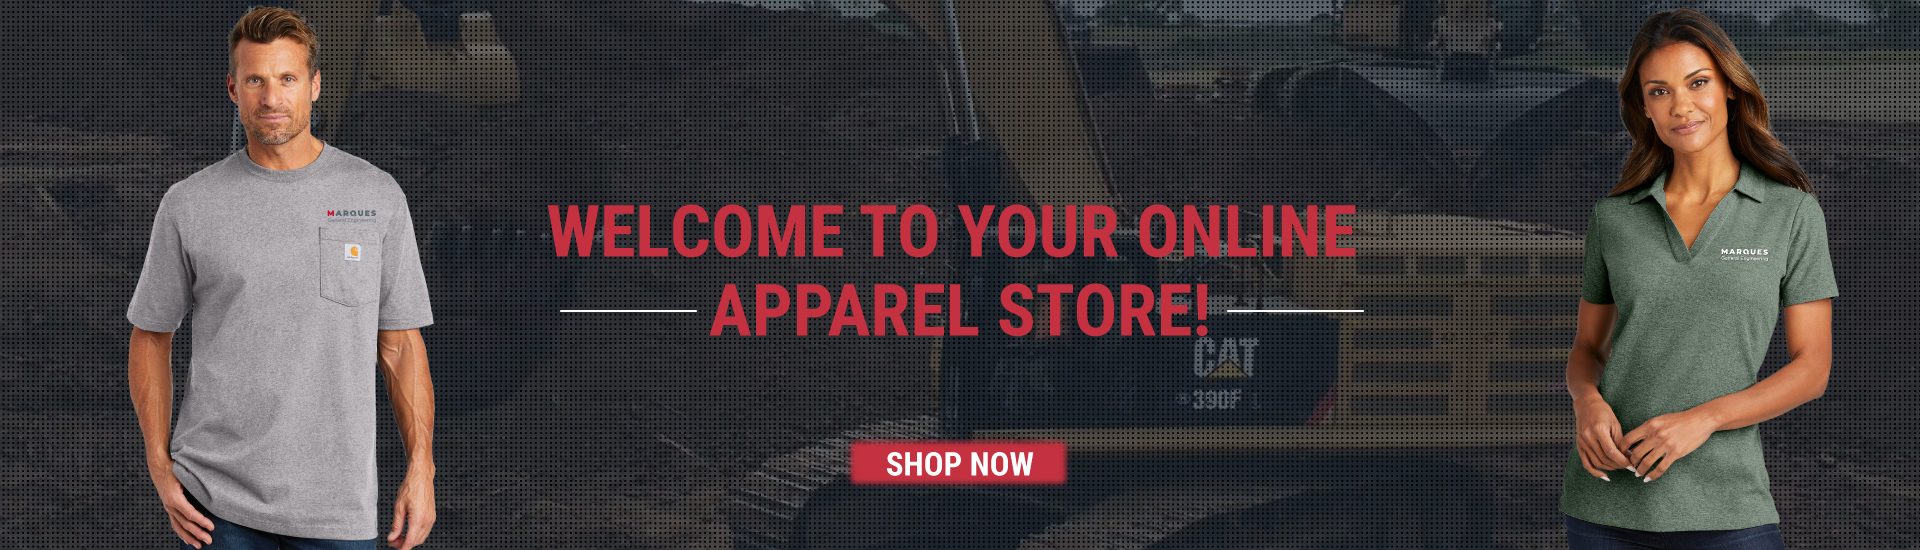 Welcome to your Online Apparel Store!